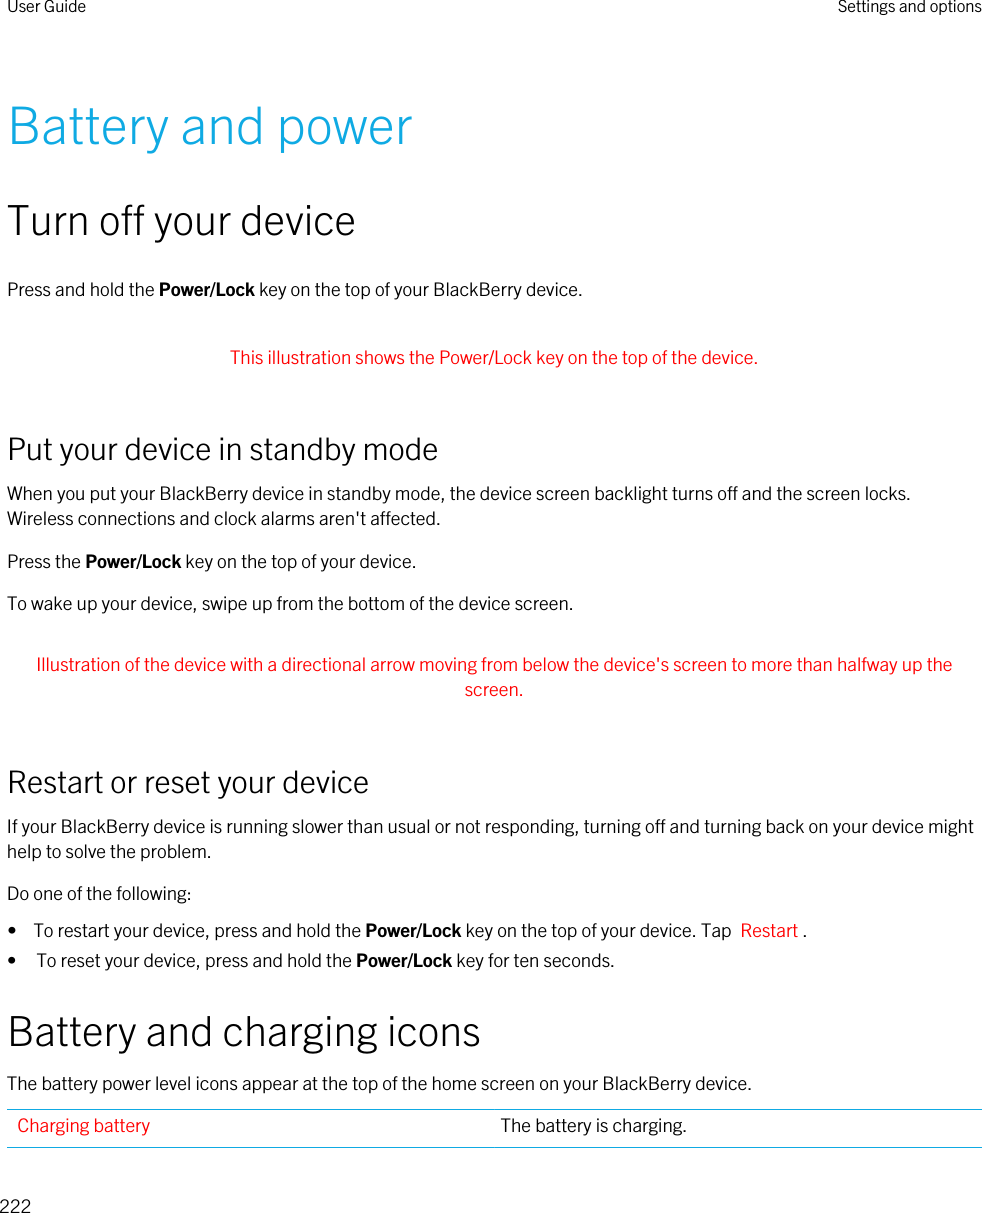 Battery and powerTurn off your devicePress and hold the Power/Lock key on the top of your BlackBerry device. This illustration shows the Power/Lock key on the top of the device. Put your device in standby modeWhen you put your BlackBerry device in standby mode, the device screen backlight turns off and the screen locks. Wireless connections and clock alarms aren&apos;t affected.Press the Power/Lock key on the top of your device.To wake up your device, swipe up from the bottom of the device screen. Illustration of the device with a directional arrow moving from below the device&apos;s screen to more than halfway up the screen. Restart or reset your deviceIf your BlackBerry device is running slower than usual or not responding, turning off and turning back on your device might help to solve the problem.Do one of the following:•  To restart your device, press and hold the Power/Lock key on the top of your device. Tap  Restart .• To reset your device, press and hold the Power/Lock key for ten seconds.Battery and charging iconsThe battery power level icons appear at the top of the home screen on your BlackBerry device.Charging battery The battery is charging.User Guide Settings and options222